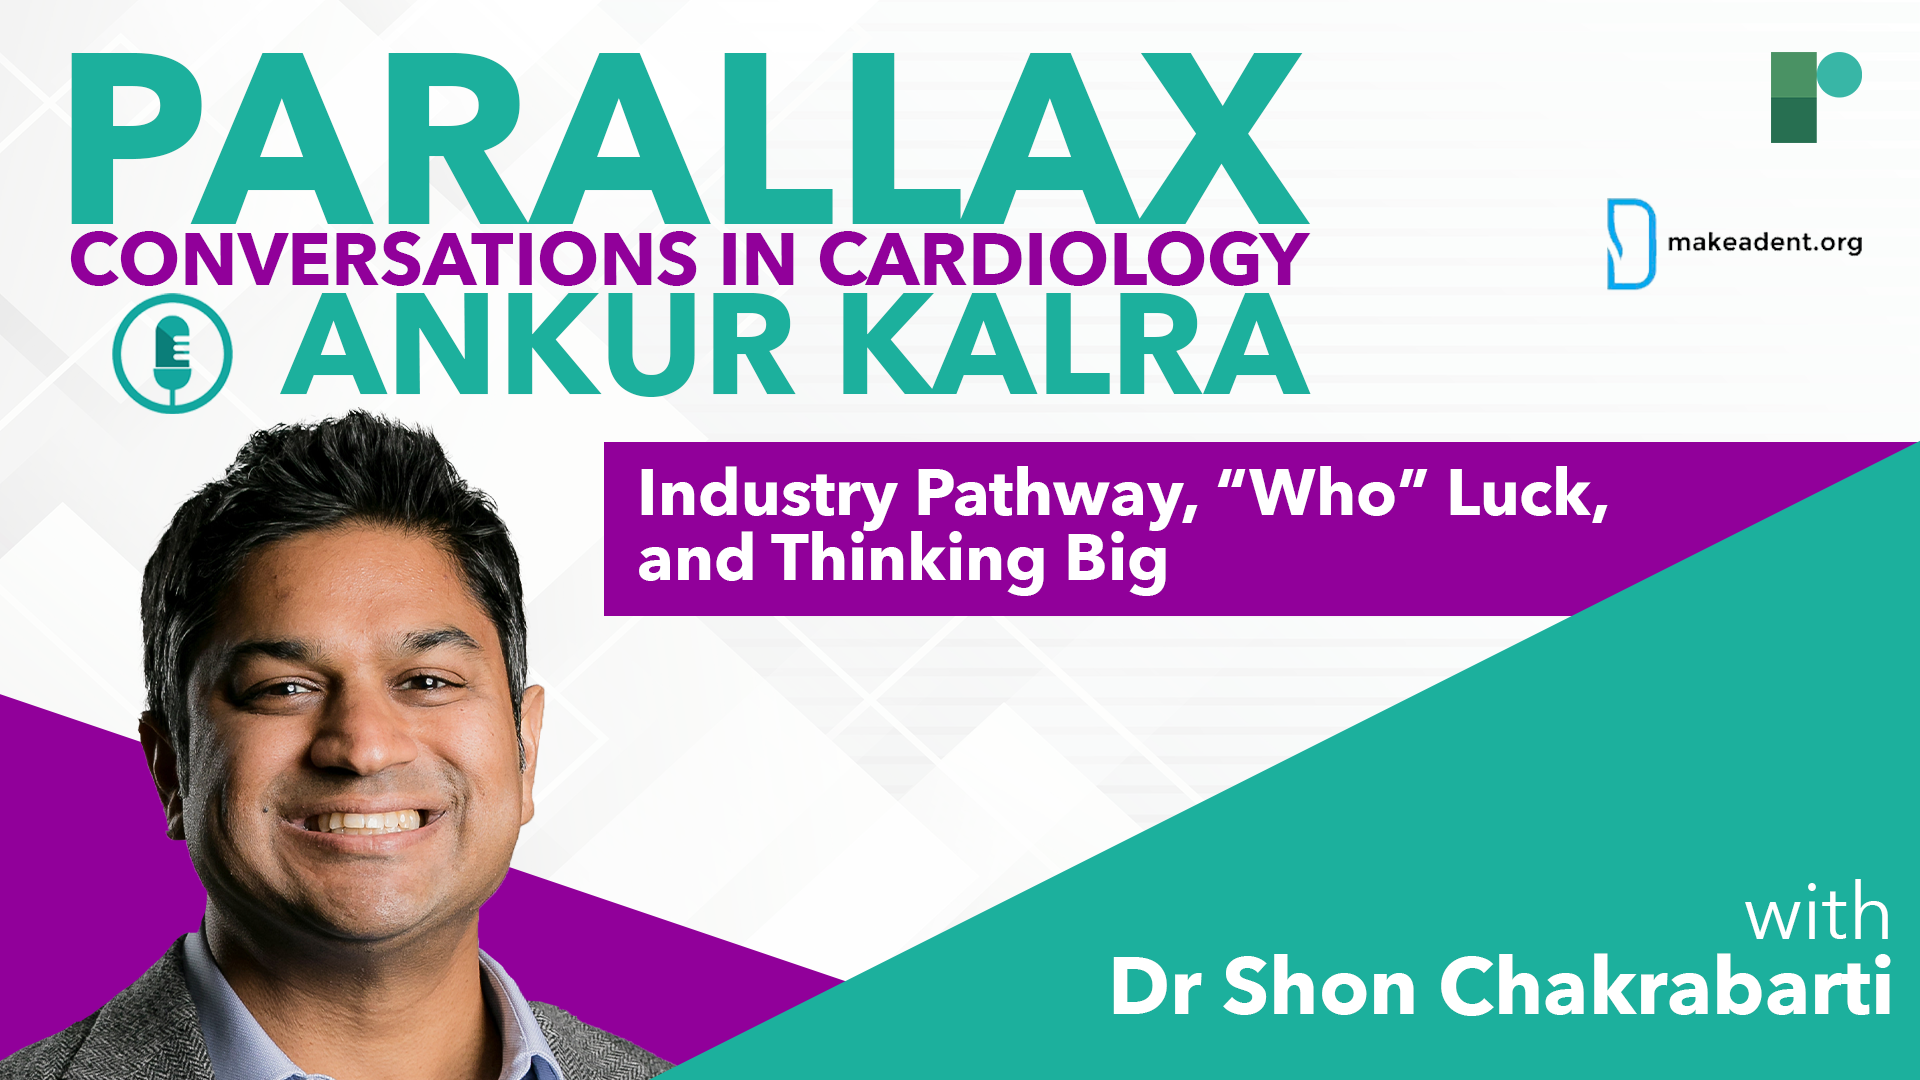 EP 65: Industry Pathway ,“Who” Luck, and Thinking Big with Dr Shon Chakrabarti